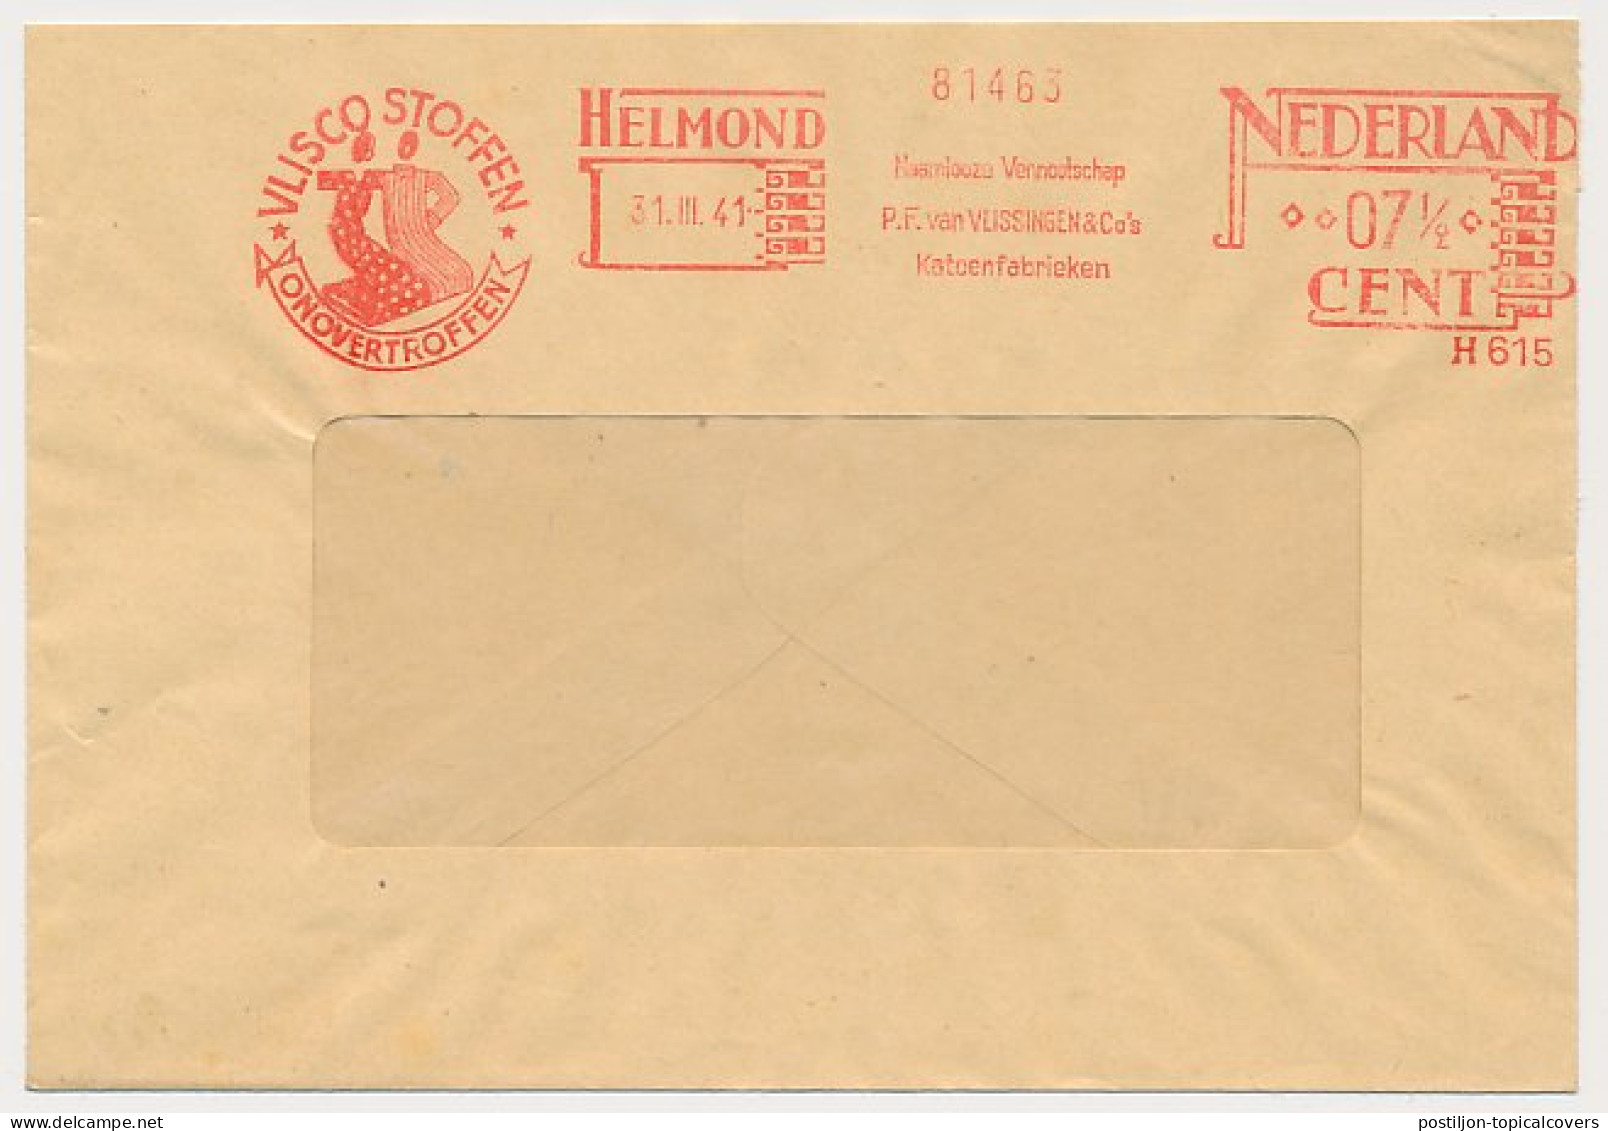 Meter Cover Netherlands 1941 Cotton Factory - Clothing Fabrics - Helmond - Textiles